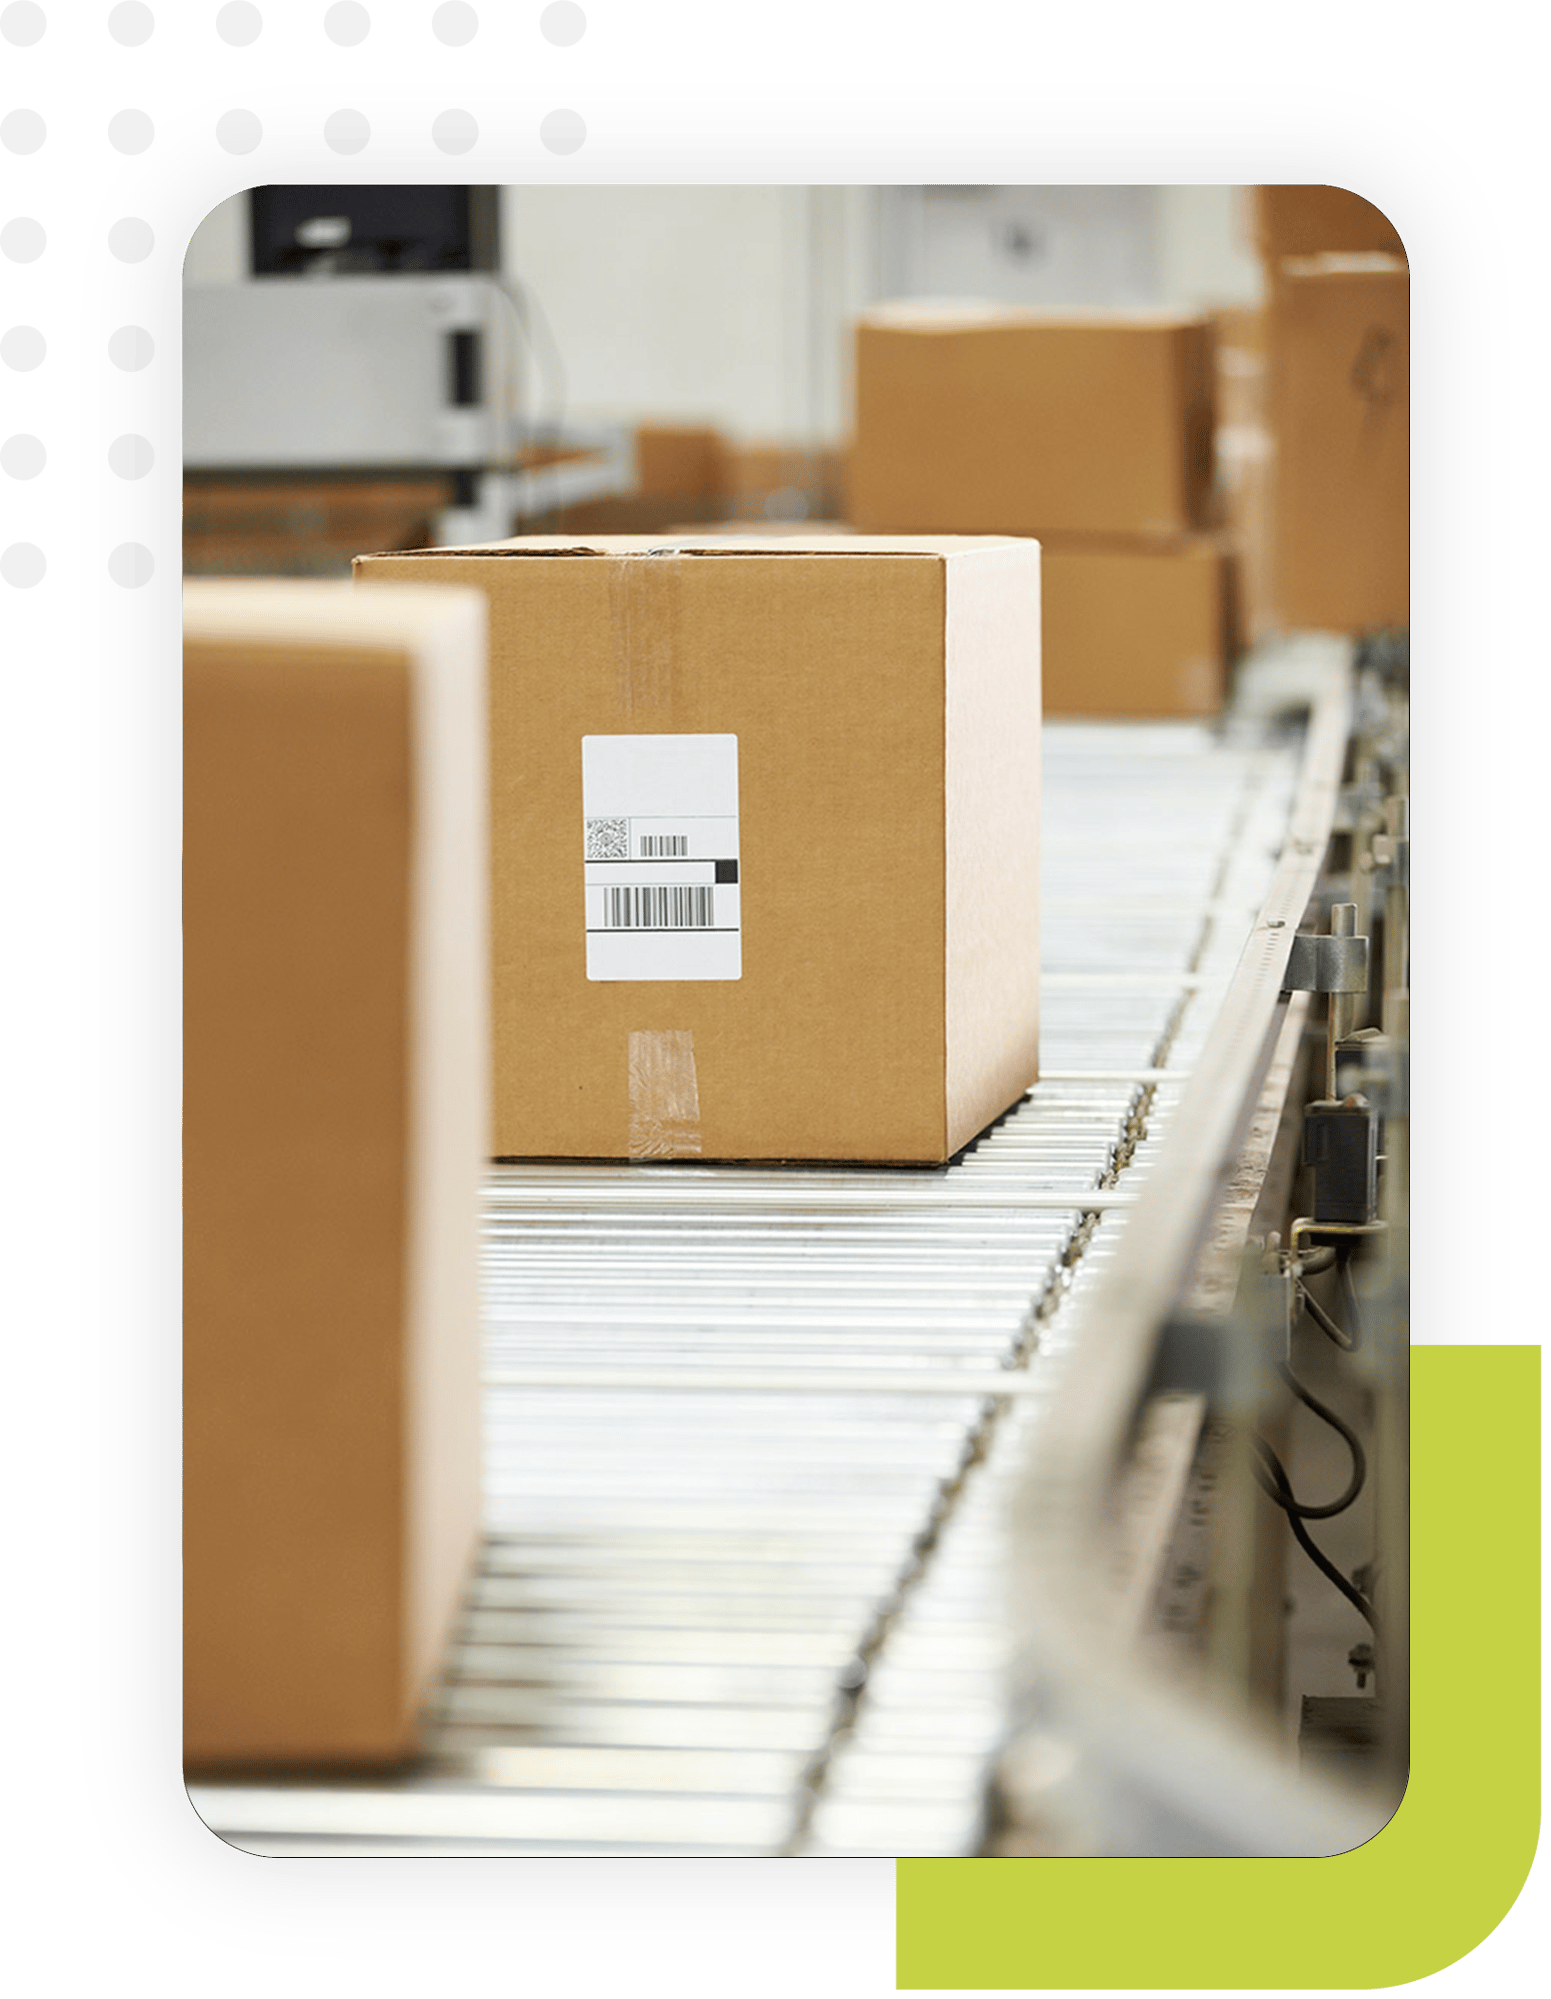 Boxes in a fulfilment centre